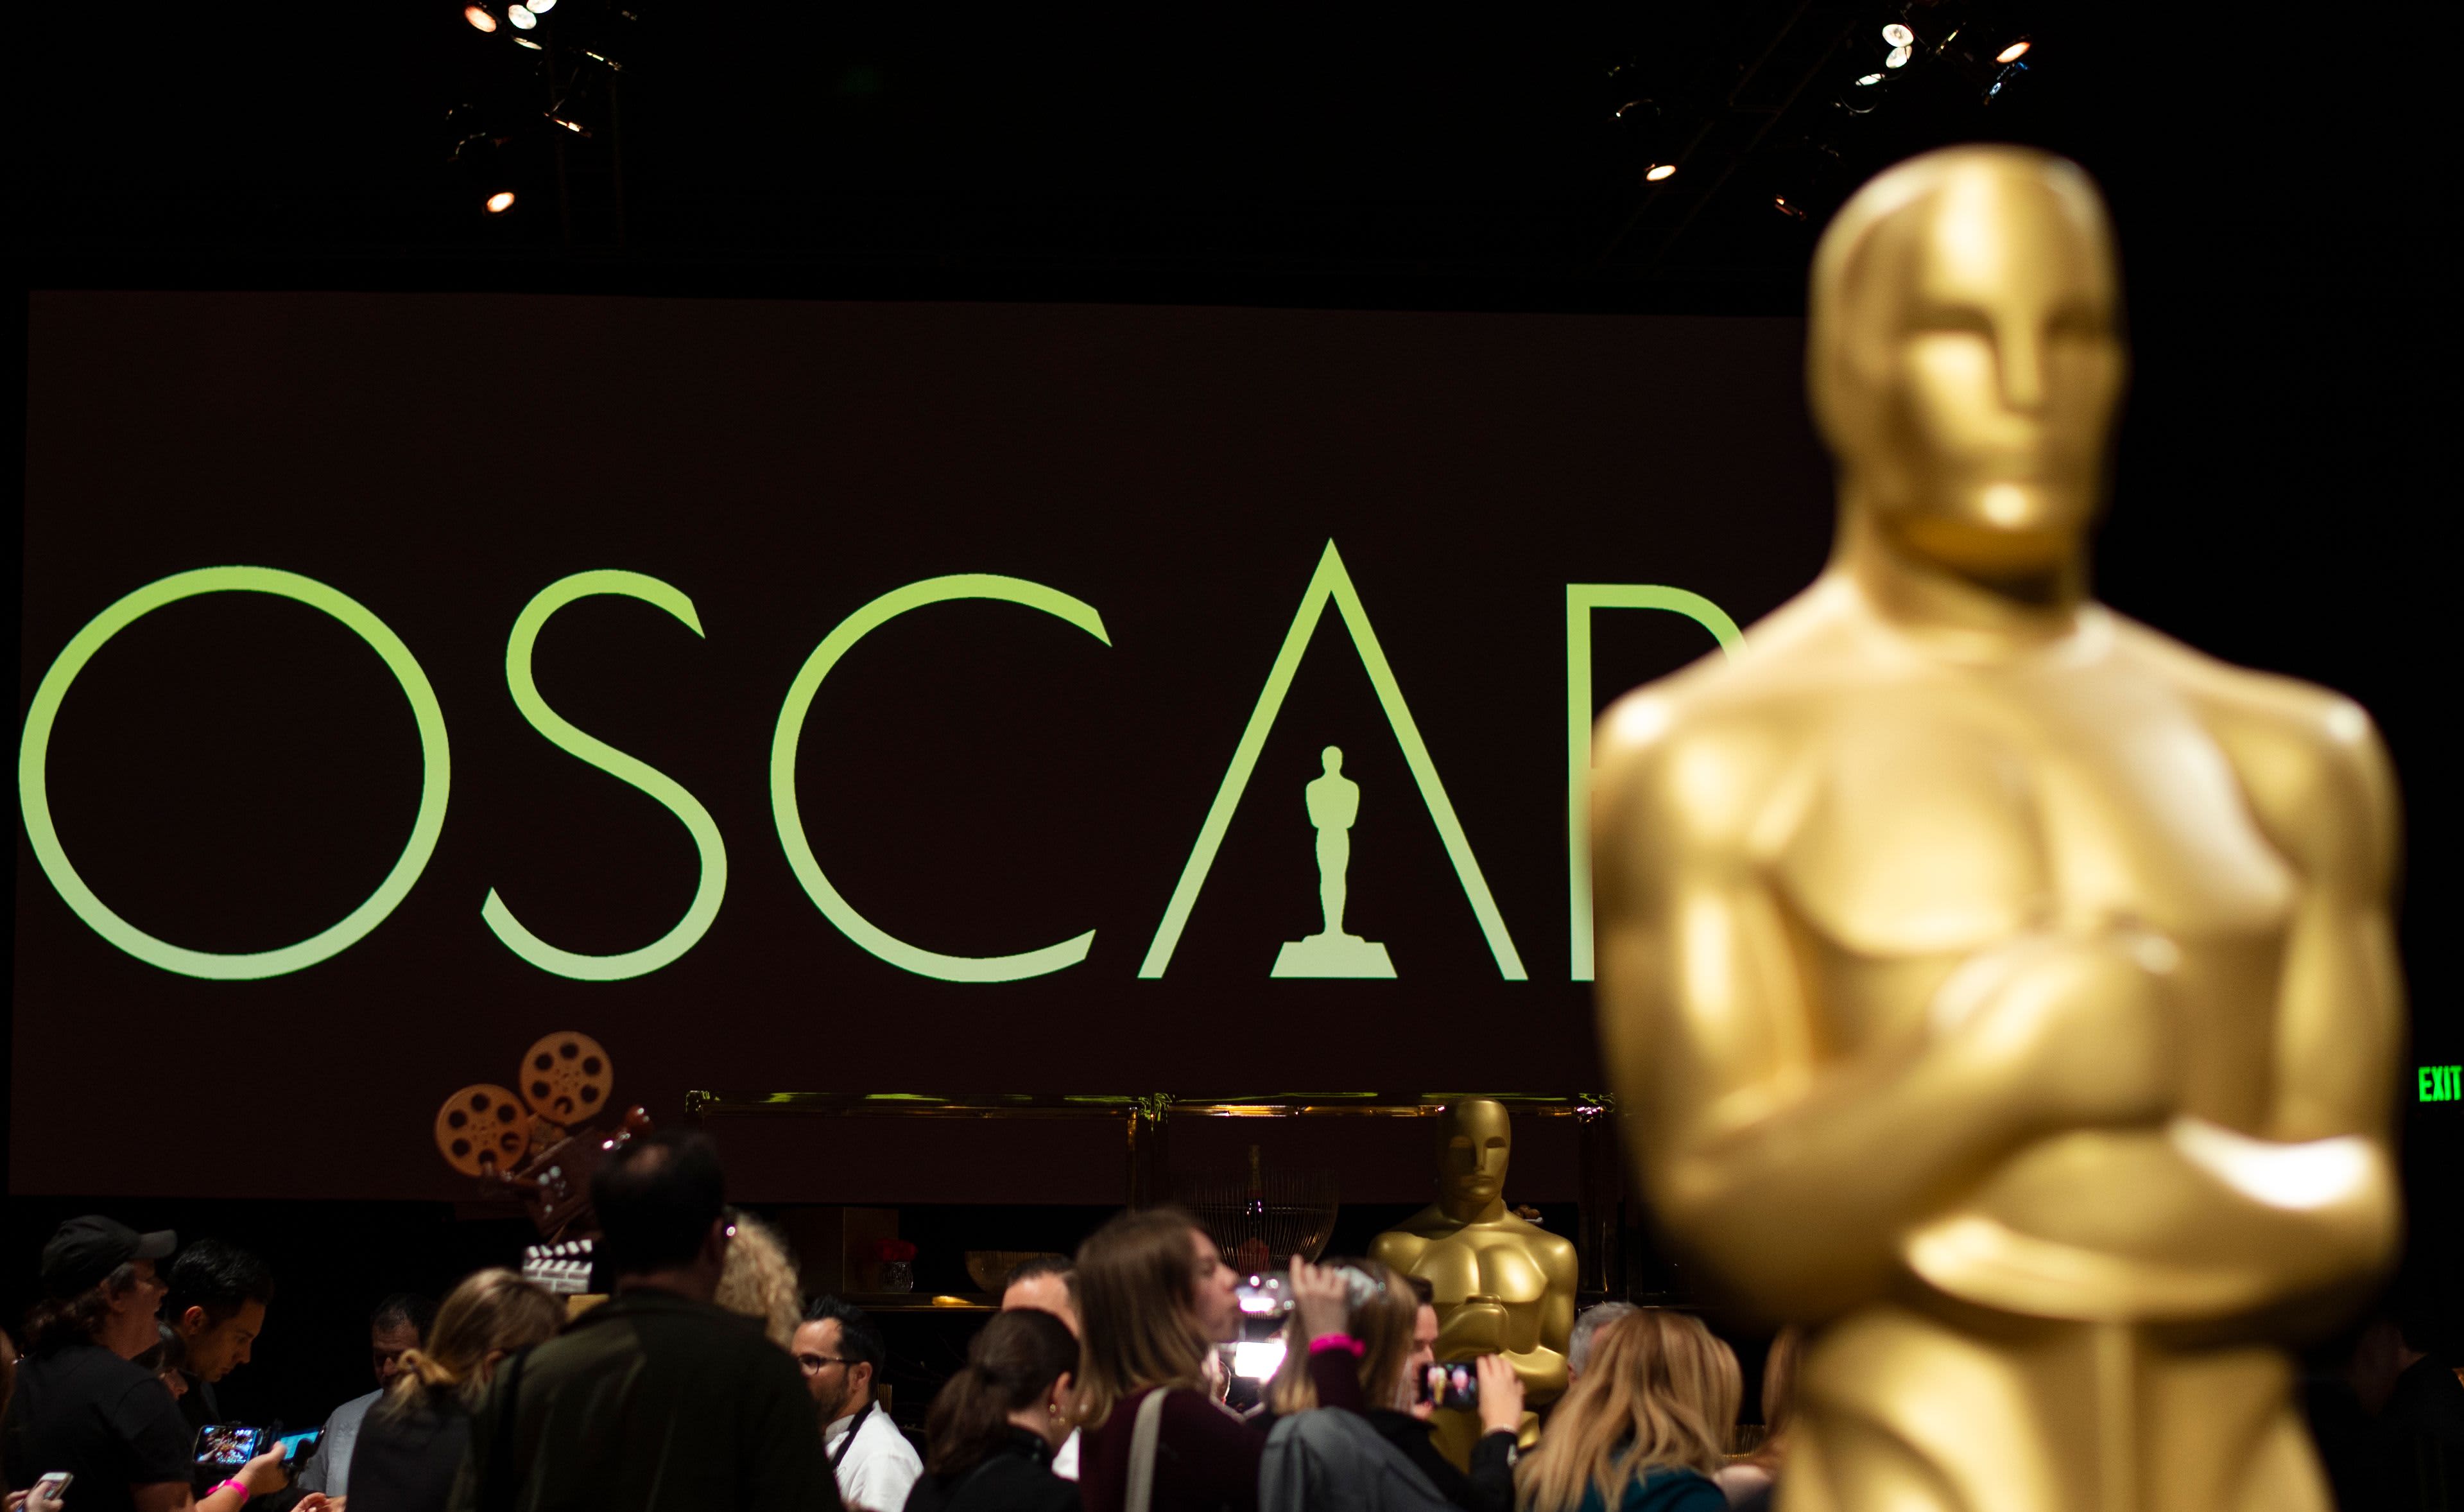 Oscars sells out ad inventory despite awards show ratings declines